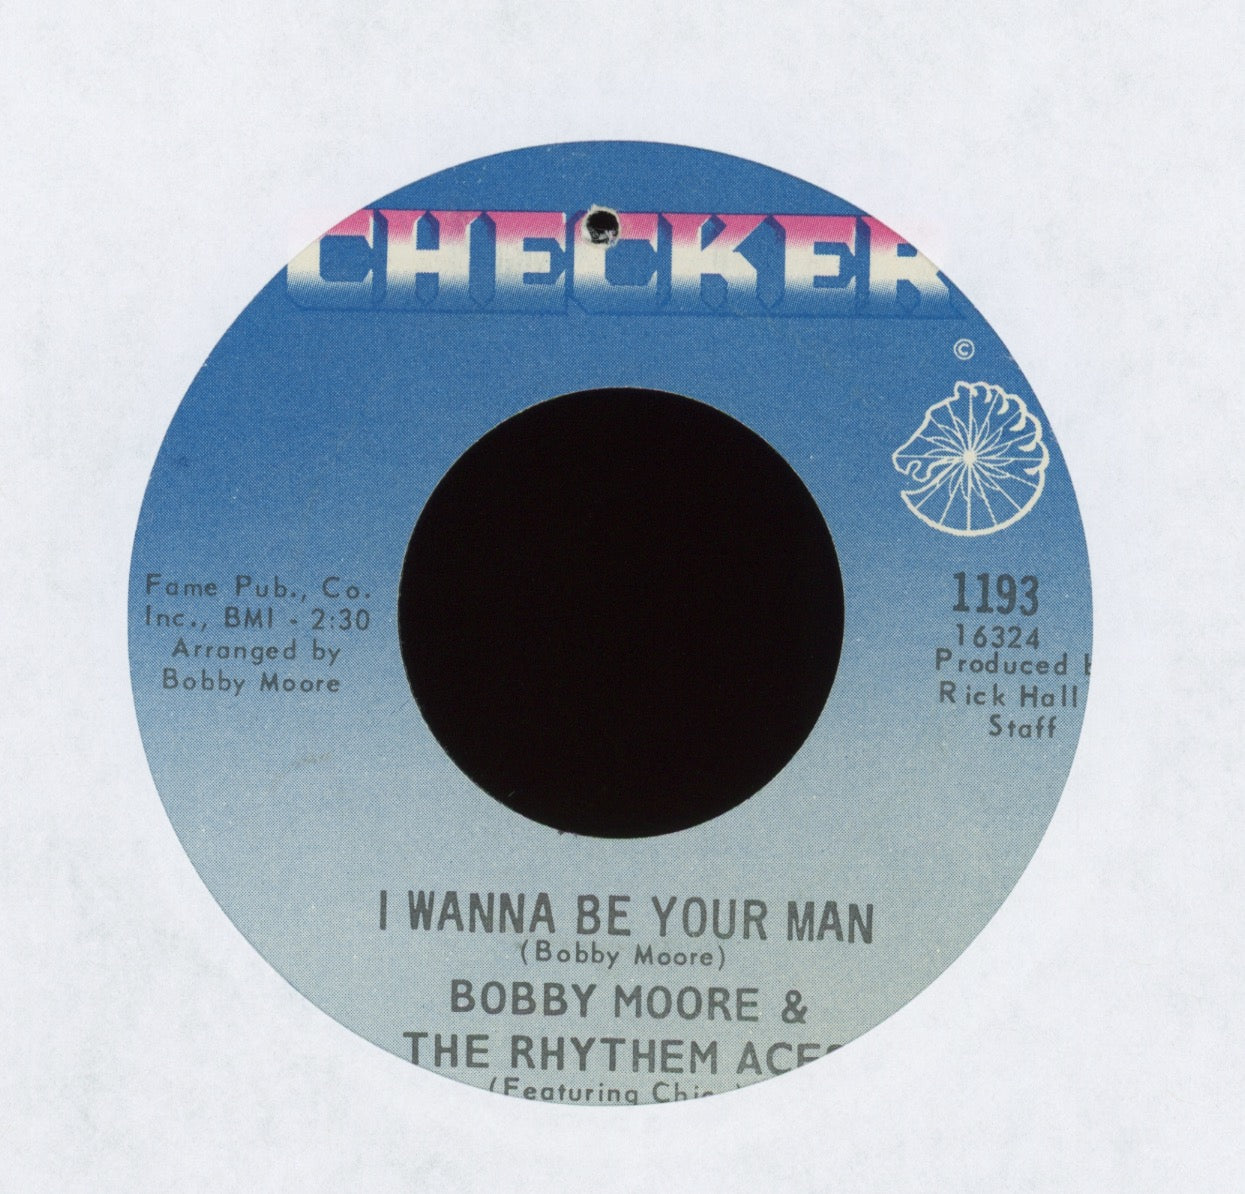 Bobby Moore & The Rhythm Aces - I Wanna Be Your Man on Checker Soul 45